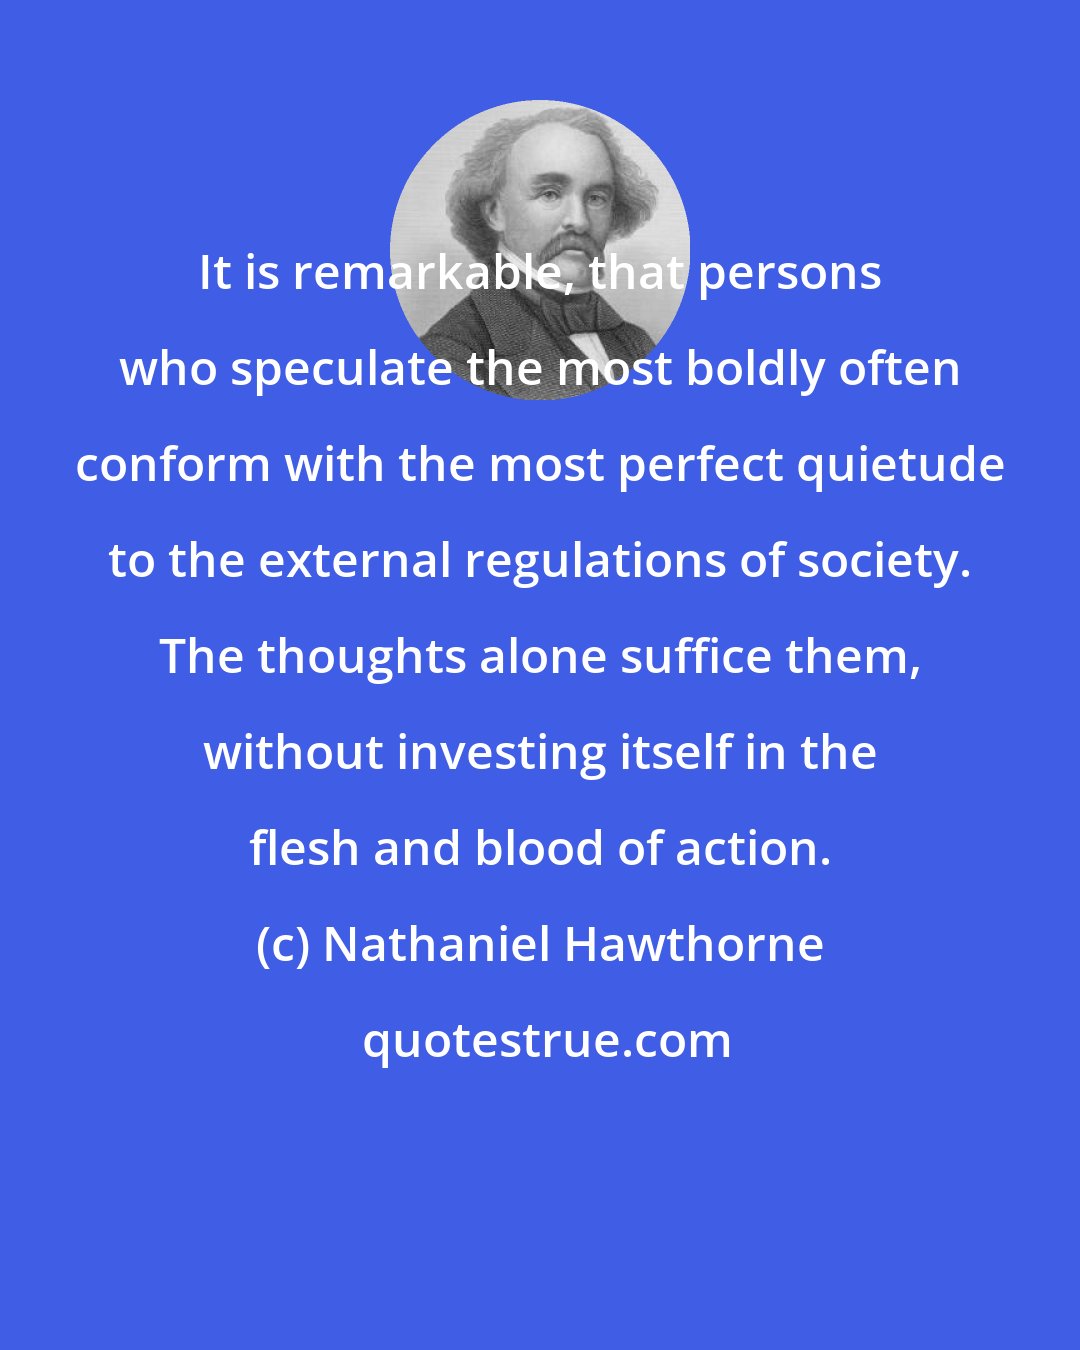 Nathaniel Hawthorne: It is remarkable, that persons who speculate the most boldly often conform with the most perfect quietude to the external regulations of society. The thoughts alone suffice them, without investing itself in the flesh and blood of action.